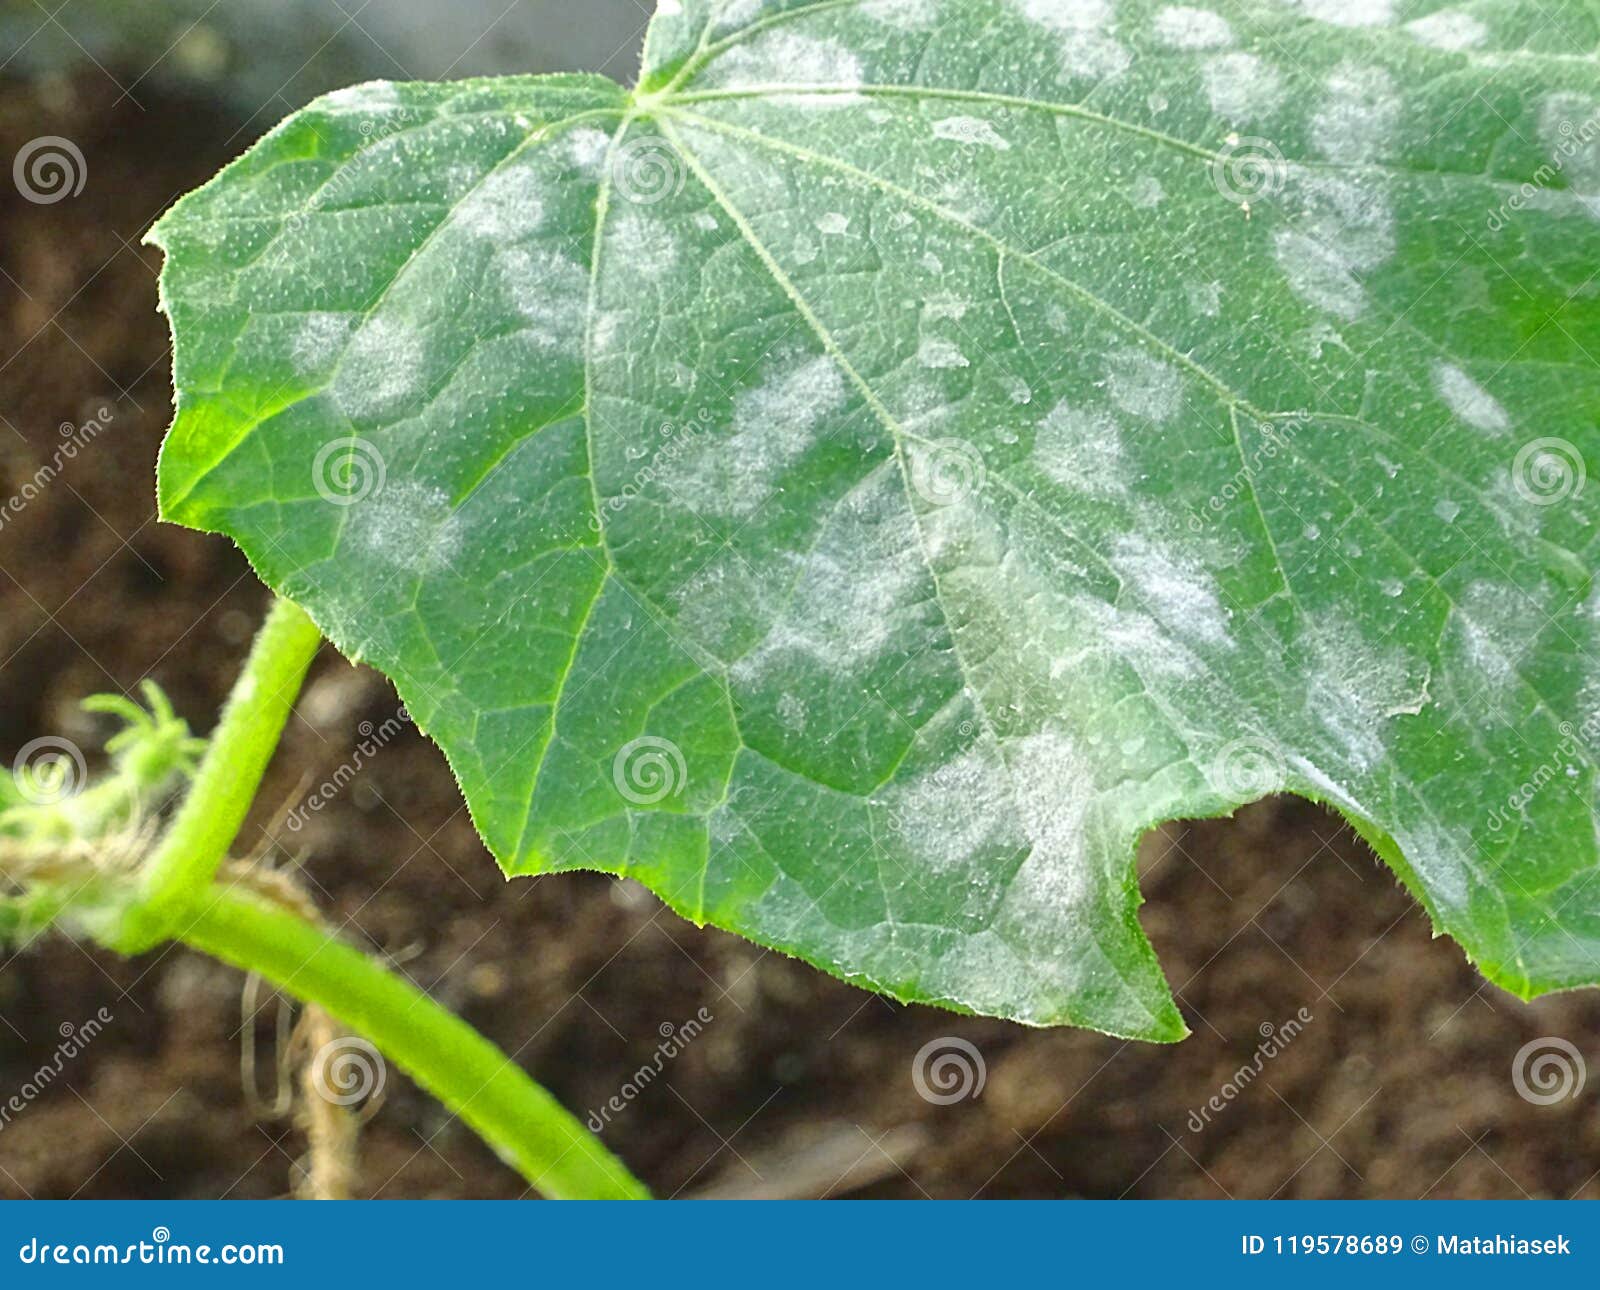 close up of cucumber leafs with white powdery mildew